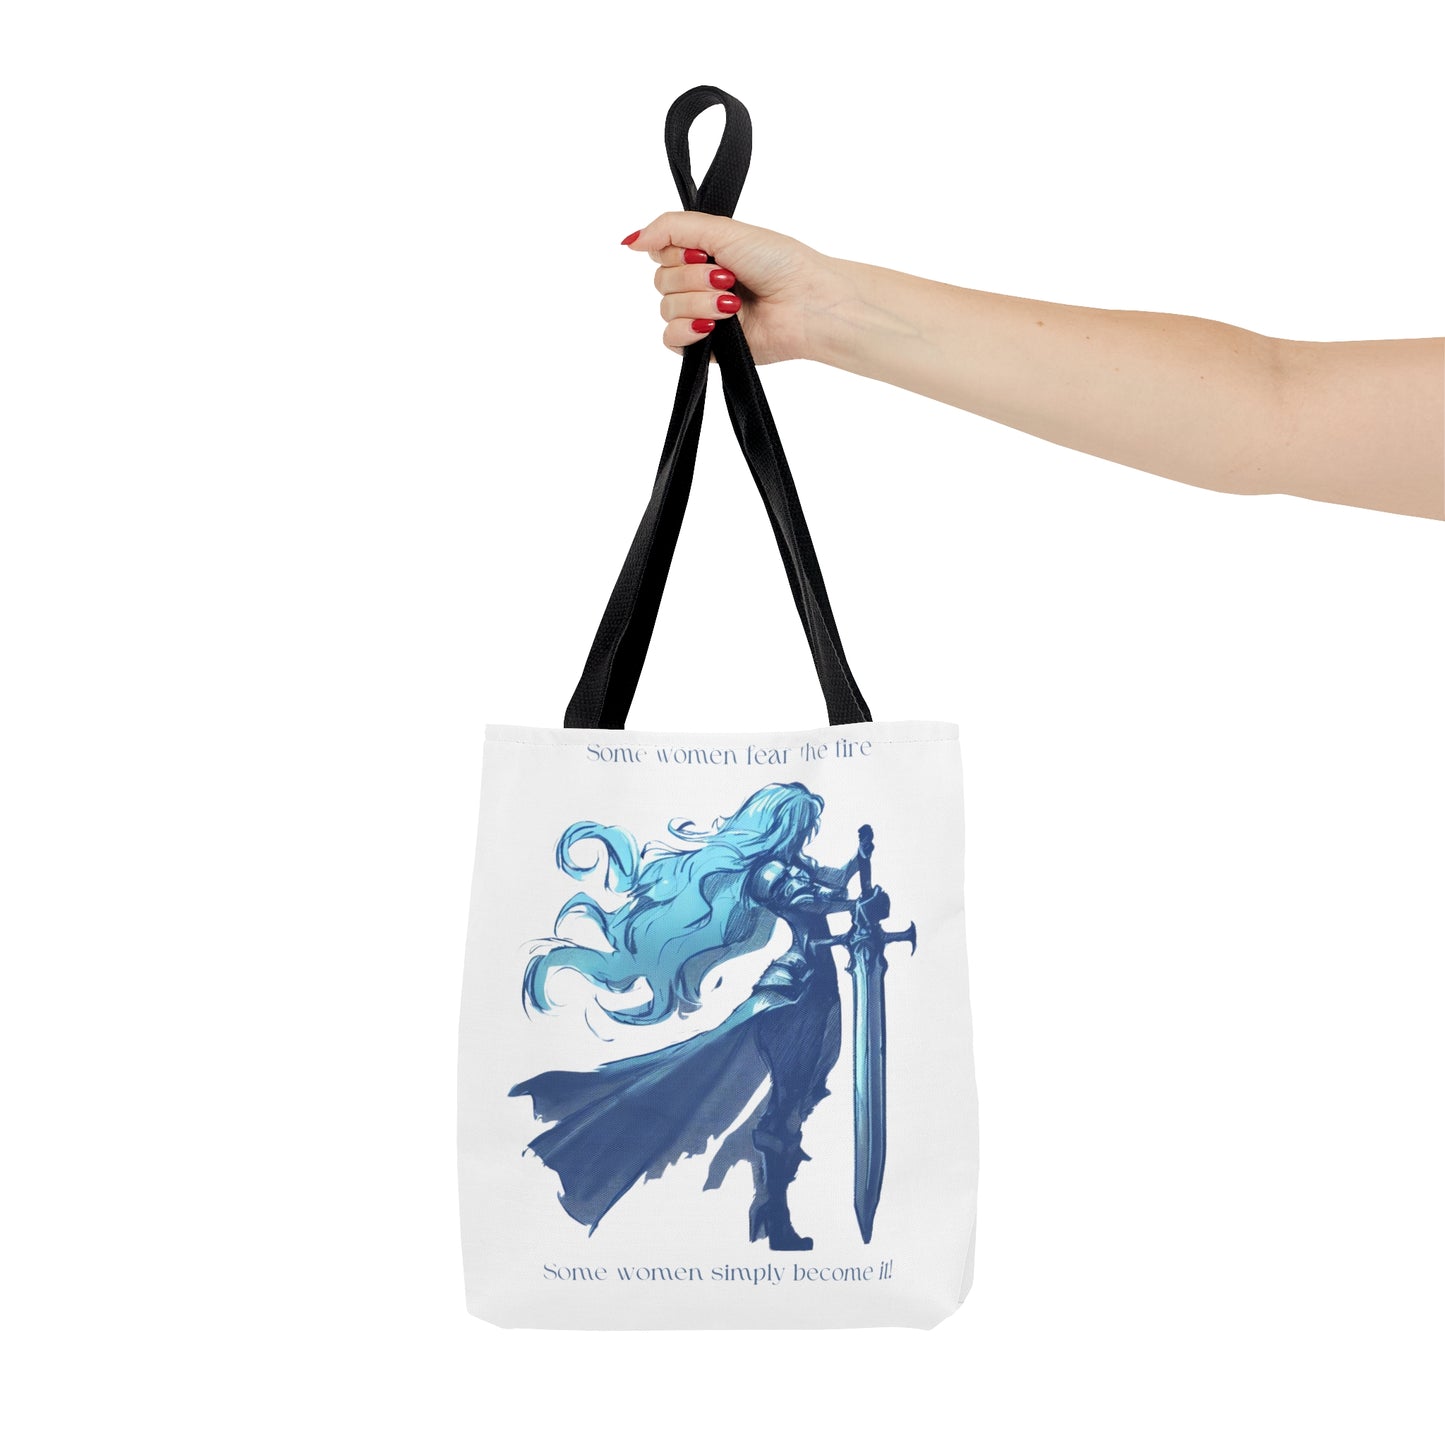 "Some women fear the fire" Tote Bag